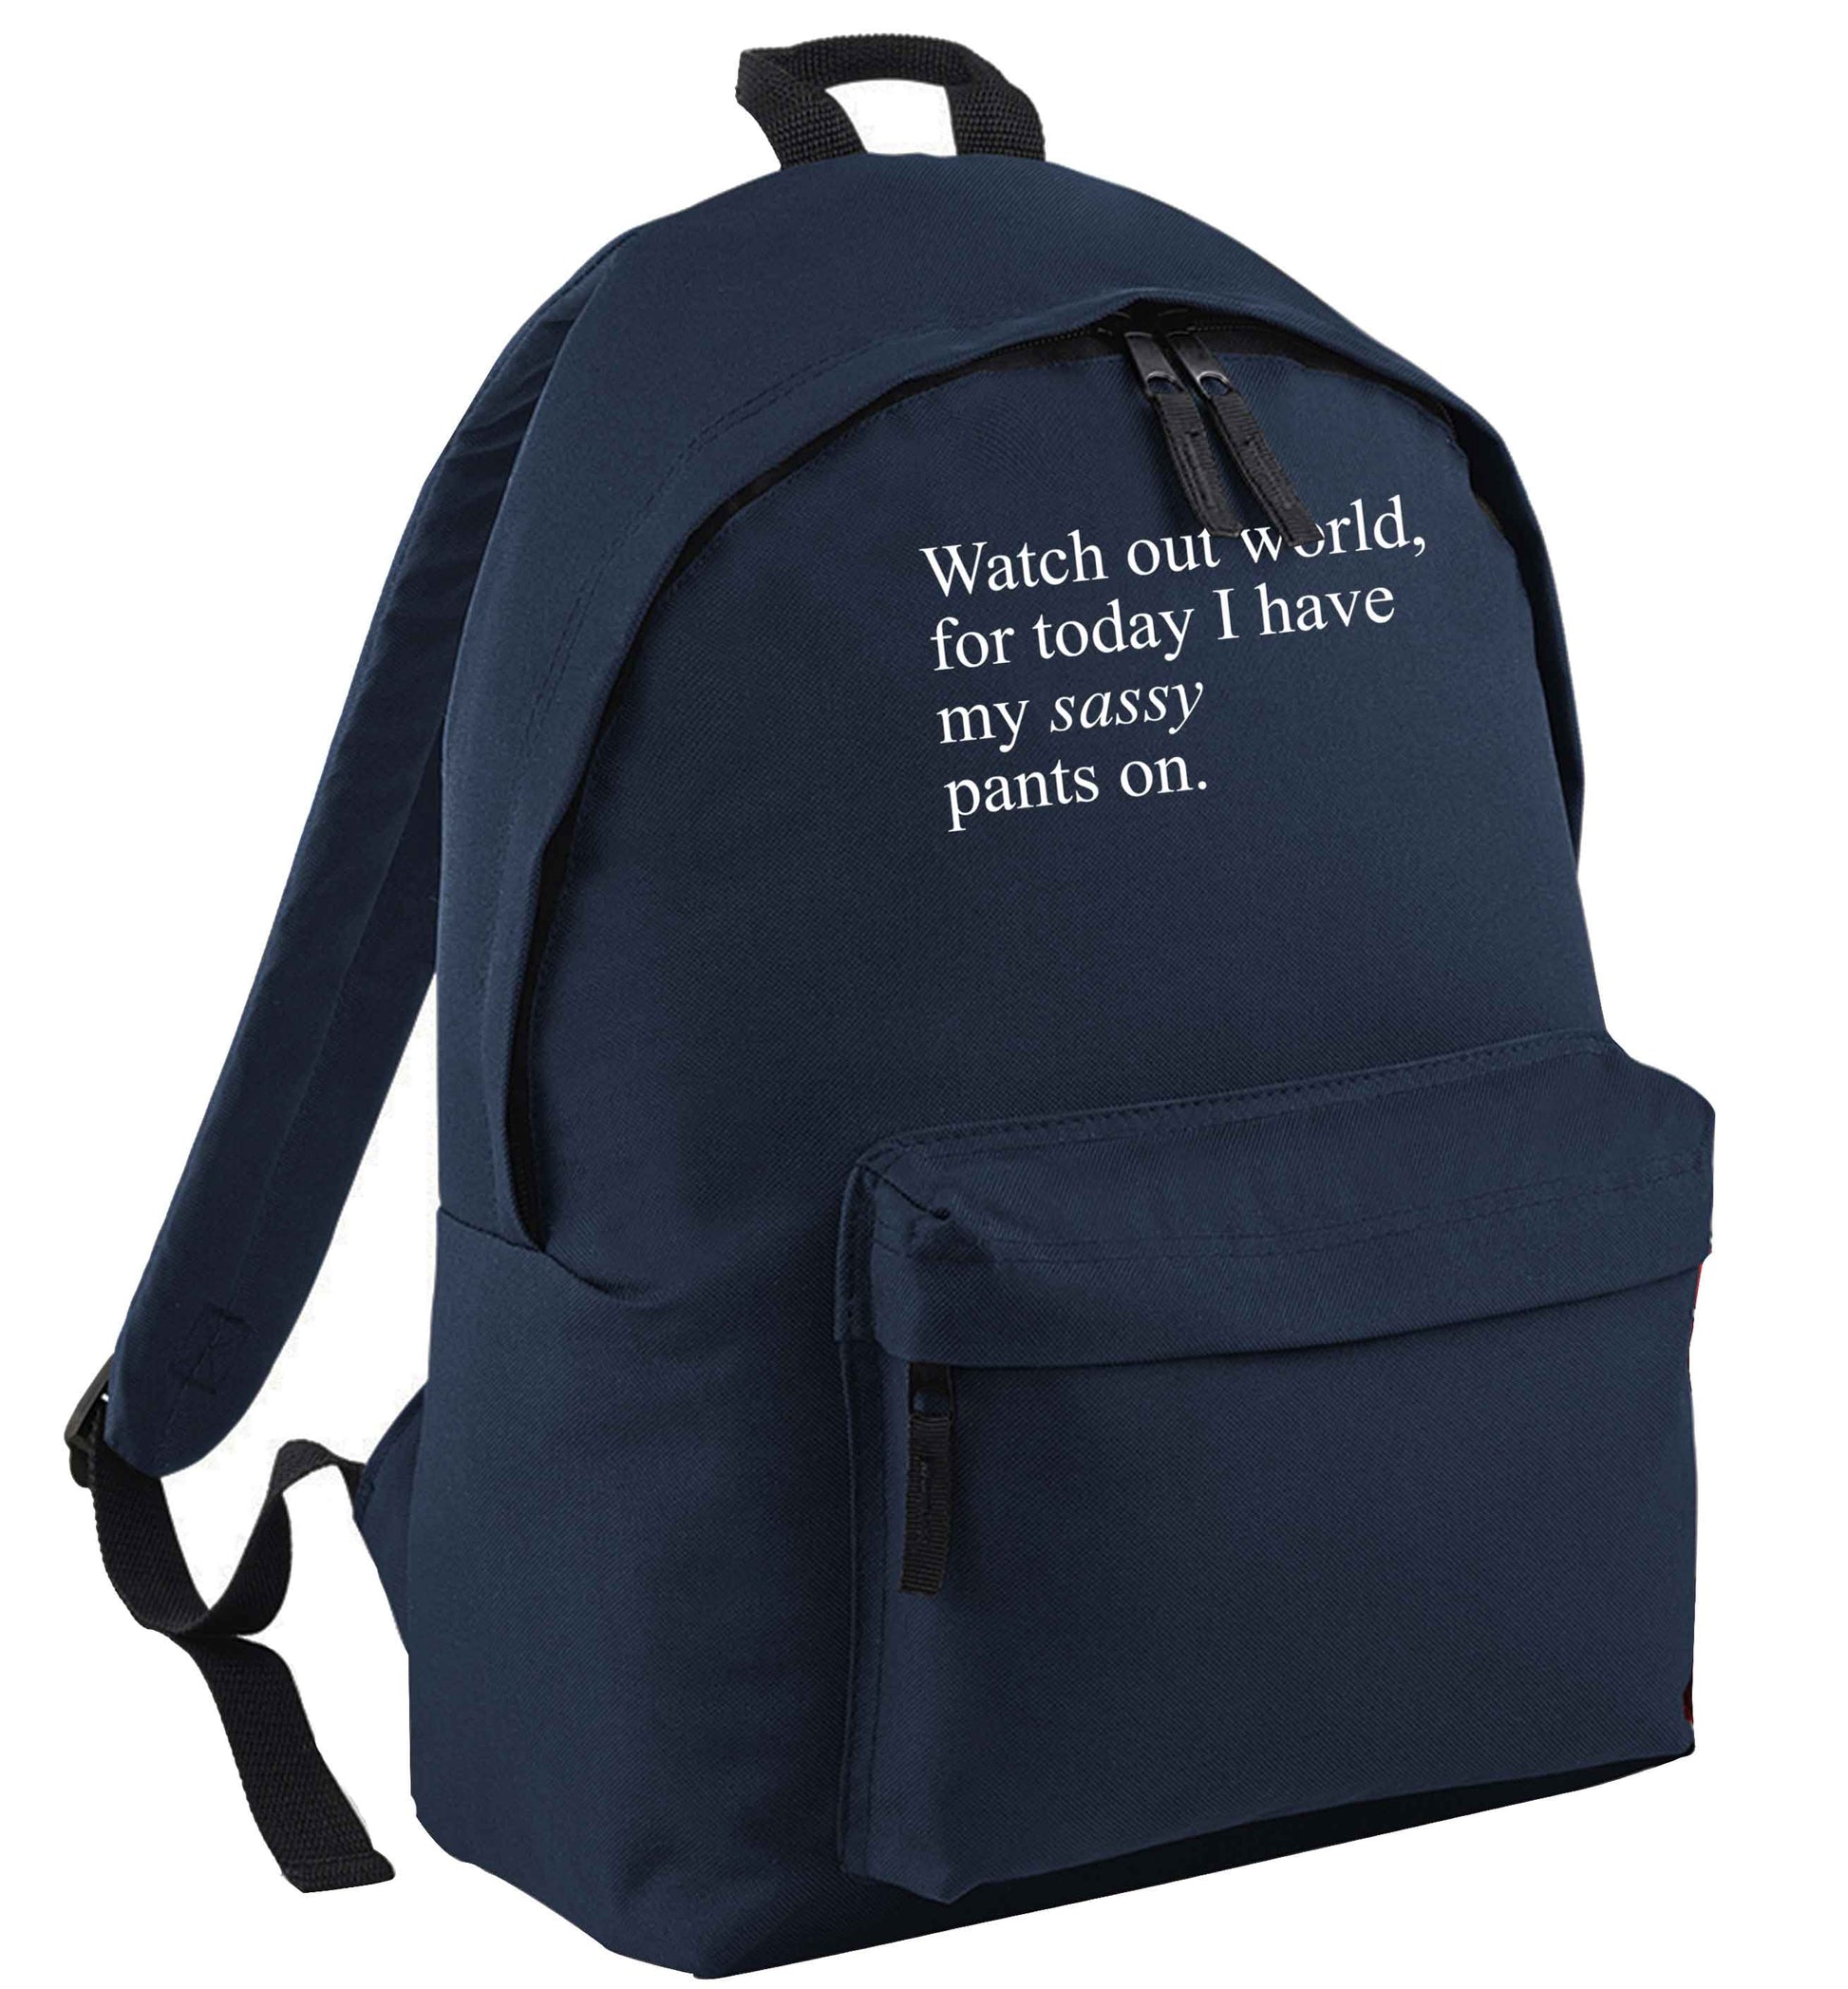 Watch out world for today I have my sassy pants on navy adults backpack